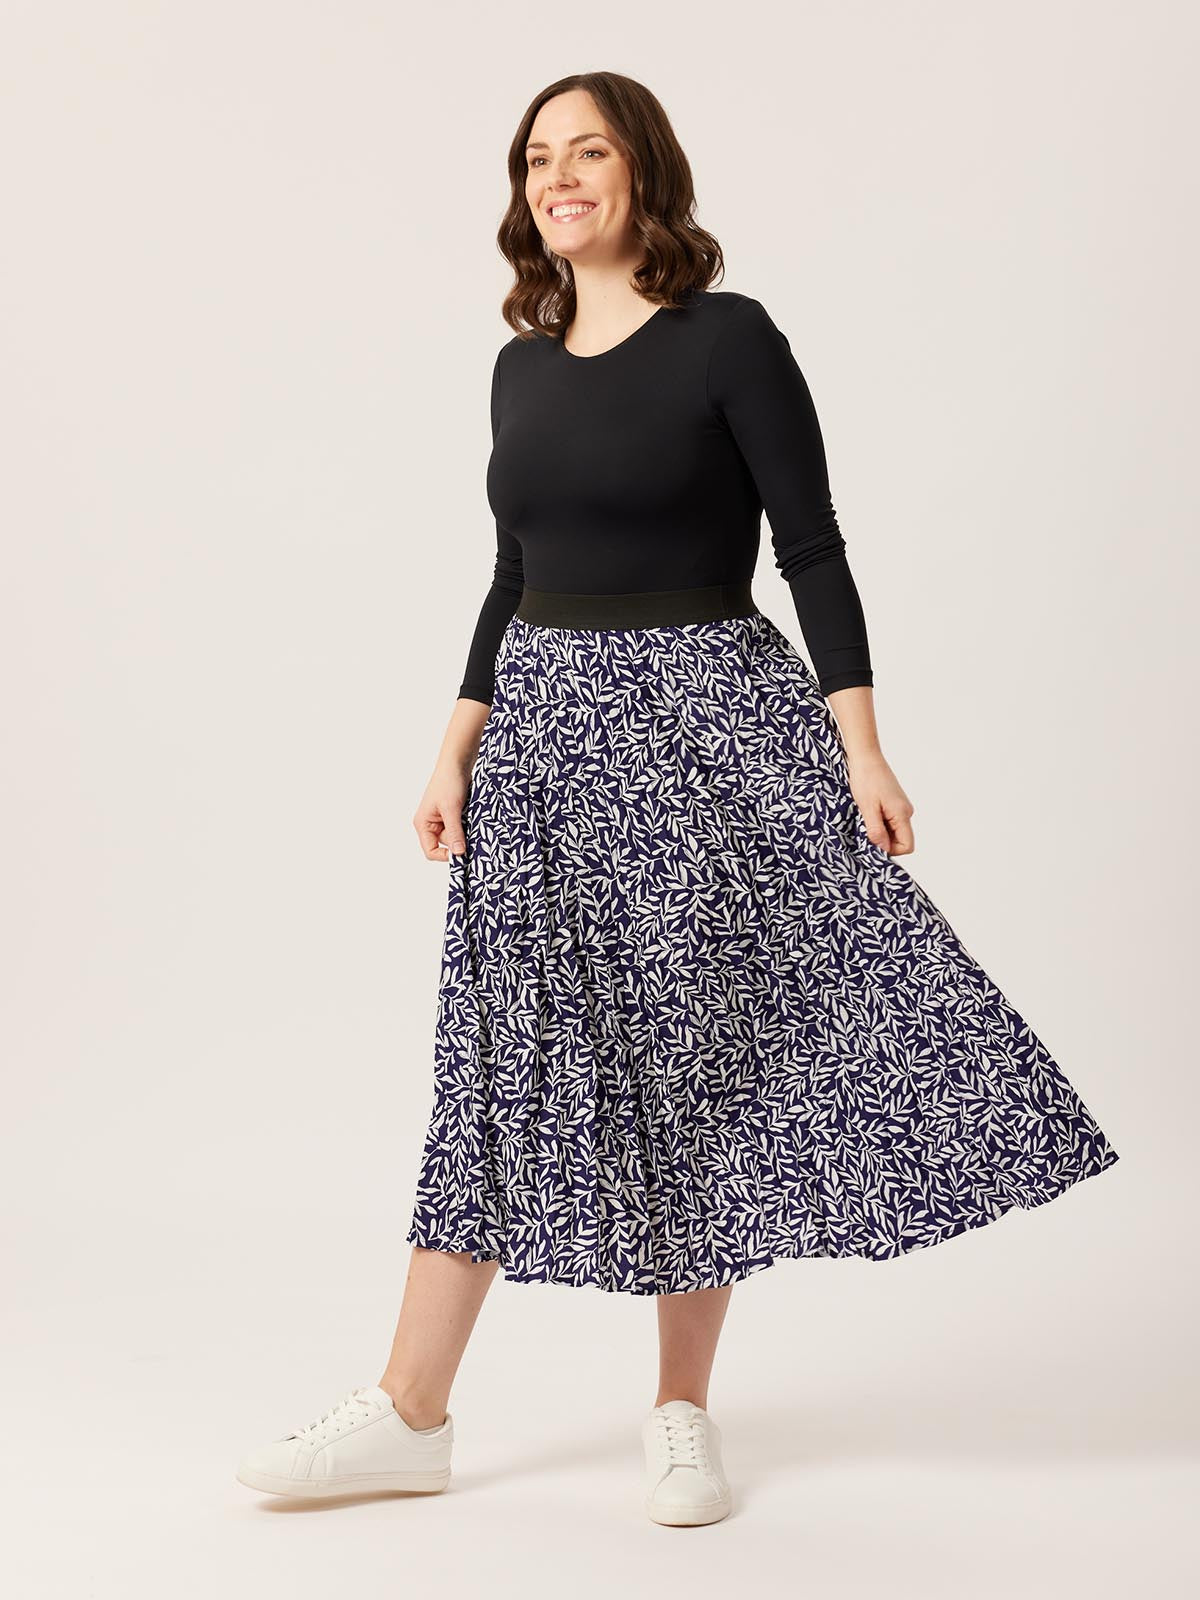 A model wearing the Gill skirt in navy with a long sleeve back top, pictured on a white background and smiling. 